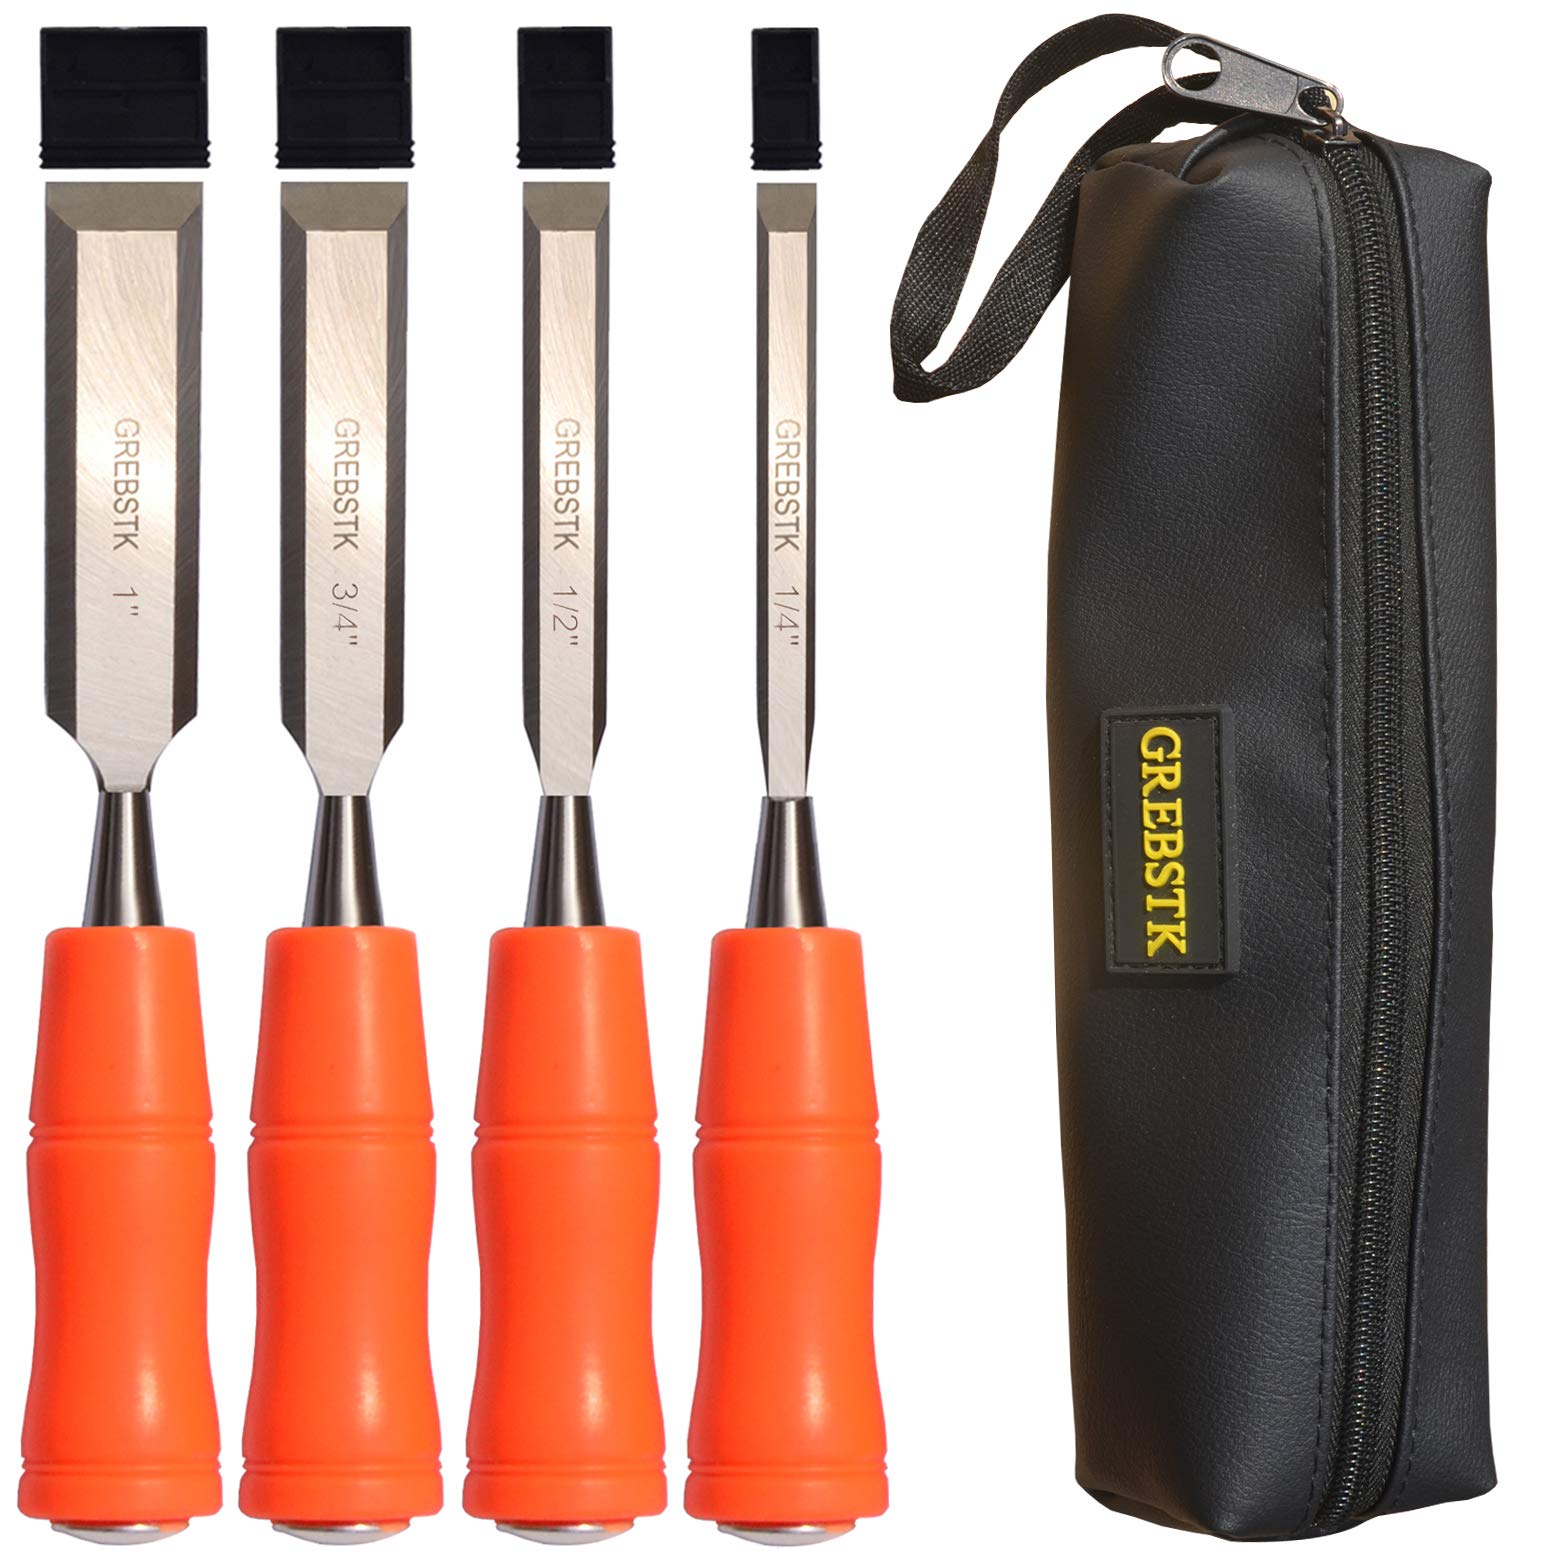 GREBSTK 4 Piece Wood Chisel Tool Sets Sturdy Chrome Vanadium Steel Chisel  Woodworking Tools with Leather Bag 4PCS 1/4 inch 1/2 inch 3/4 inch 1 inch  Regular Size Grip